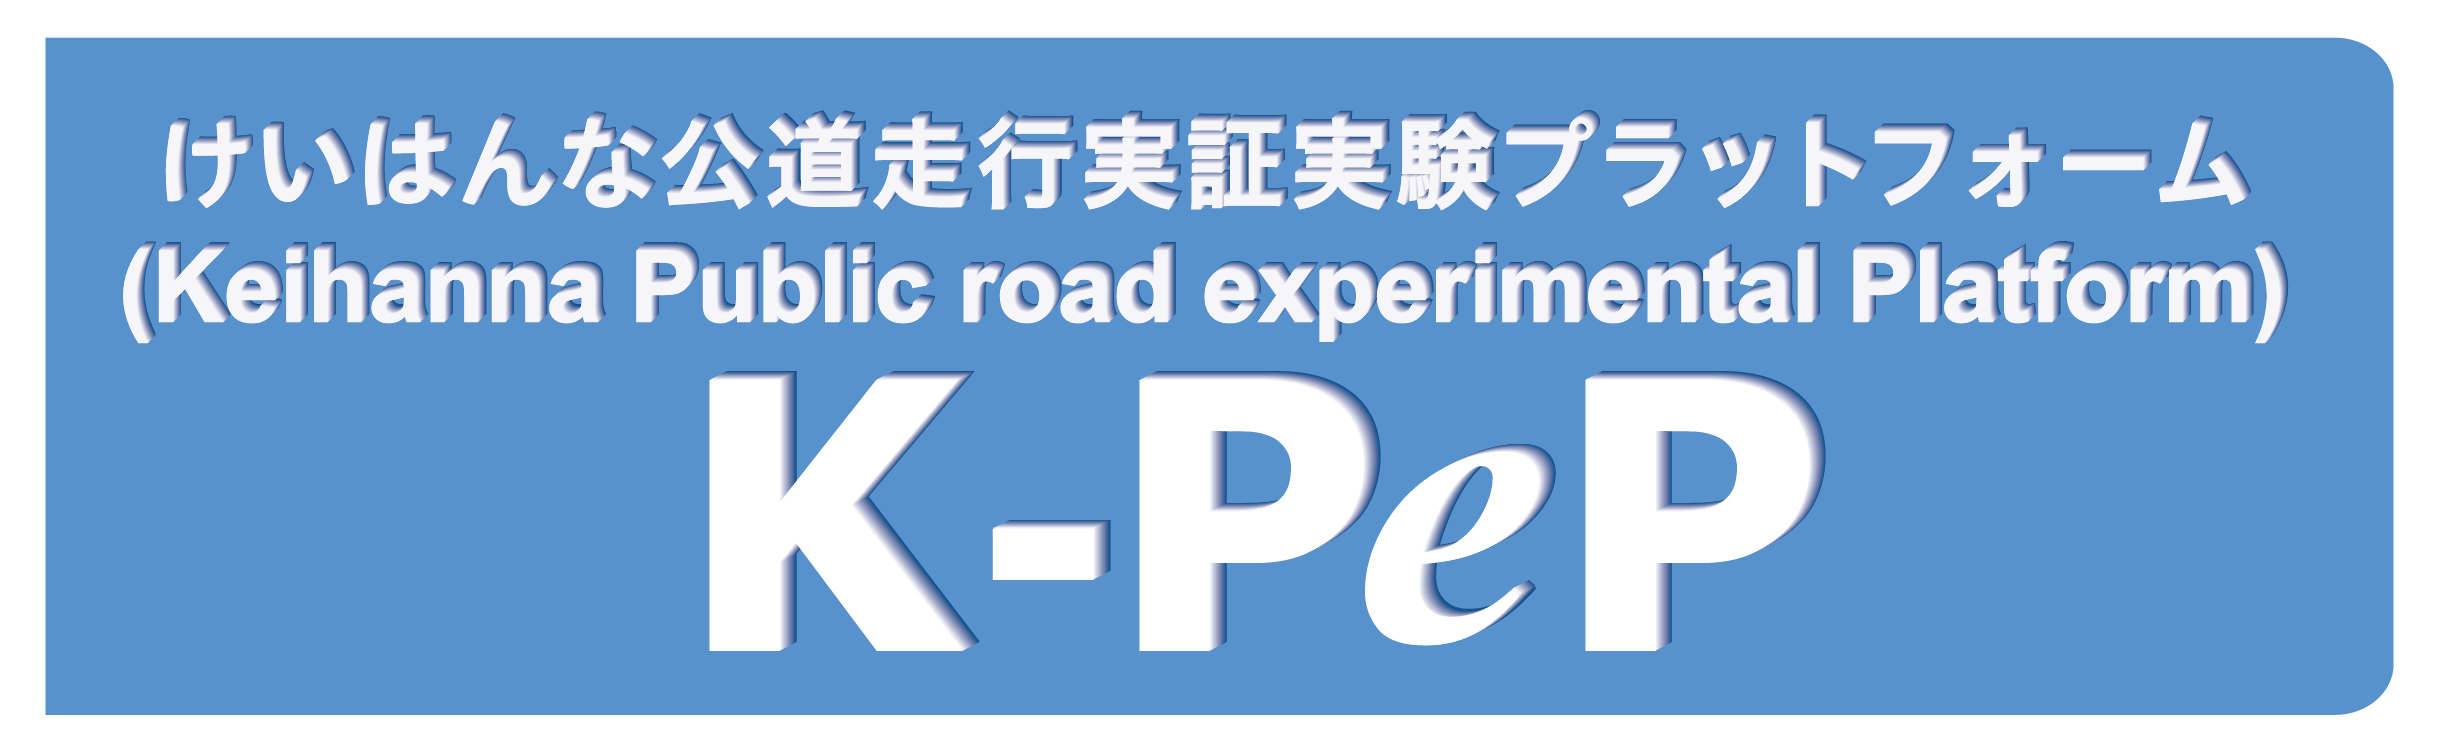 K-PePロゴ2022.png